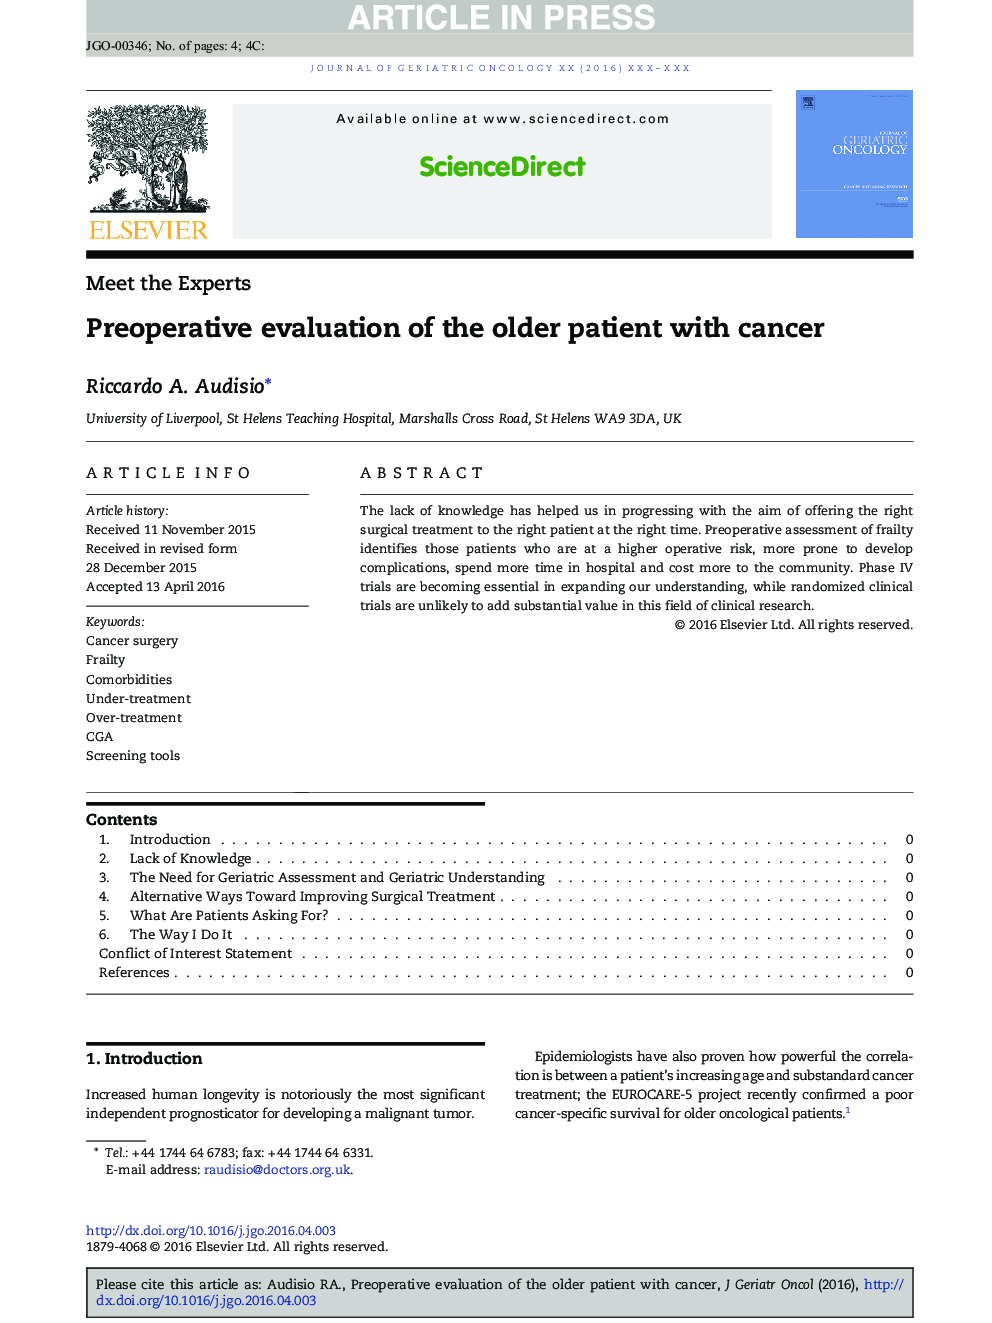 Preoperative evaluation of the older patient with cancer